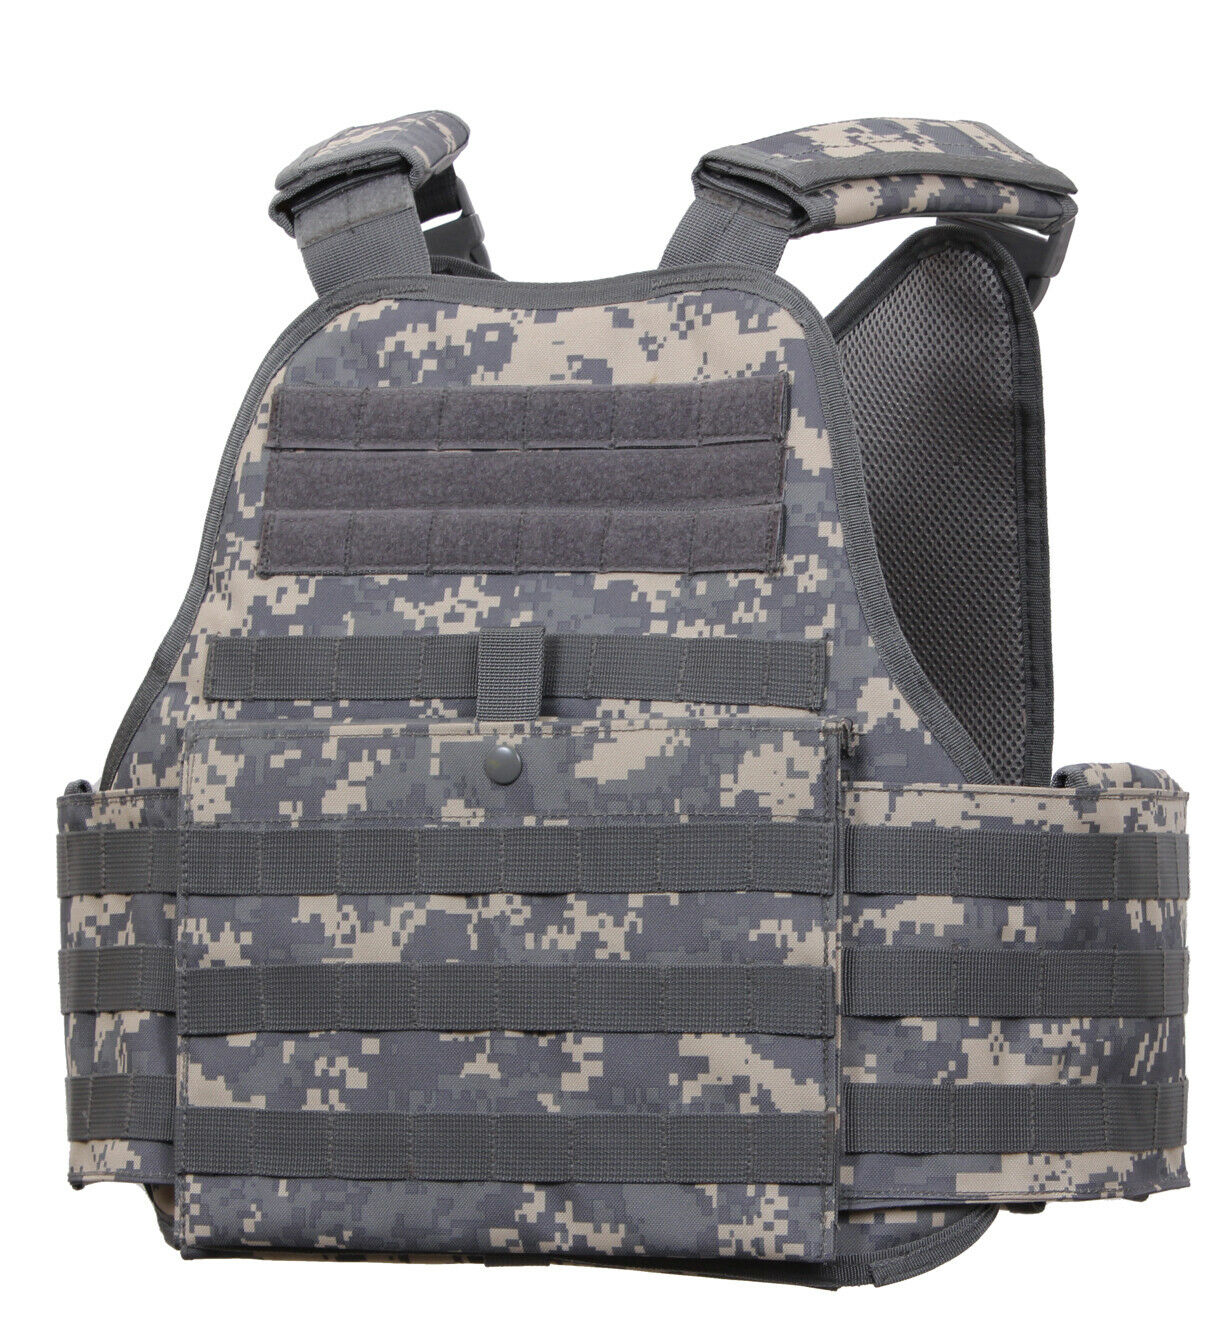 Rothco MOLLE Plate Carrier Vest Regular and Small Sizes